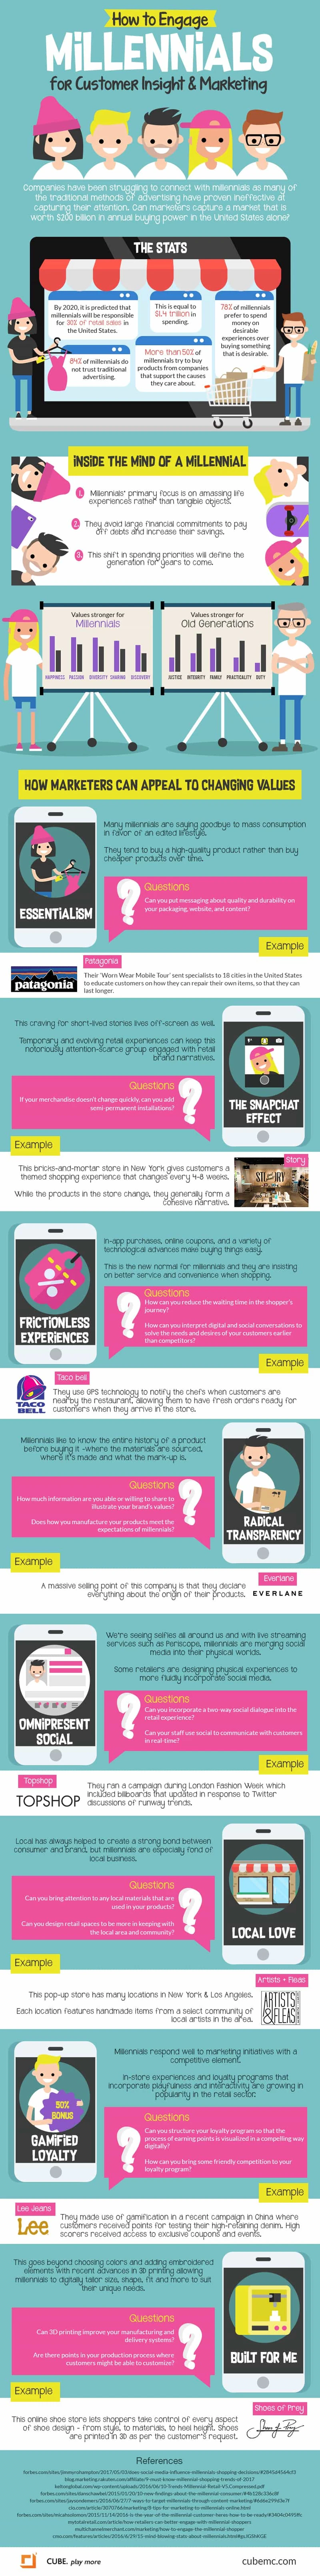 this infographic shows businesses how to market to millenials